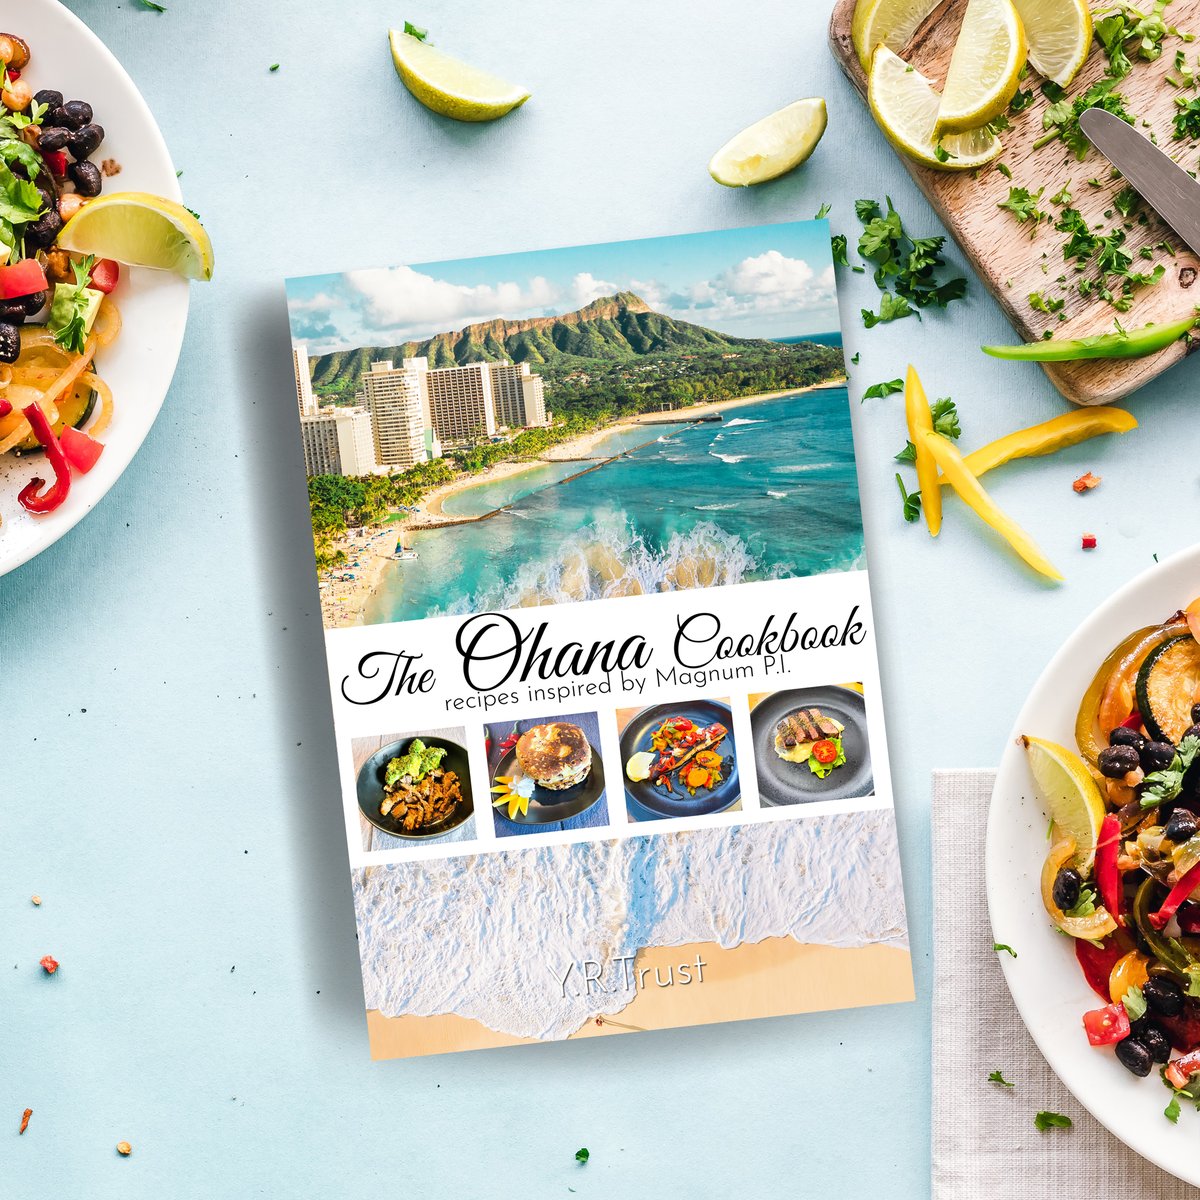 The Ohana Cookbook
Recipes inspired by #MagnumPI 
Coming soon!

#bookannouncement #cookbook